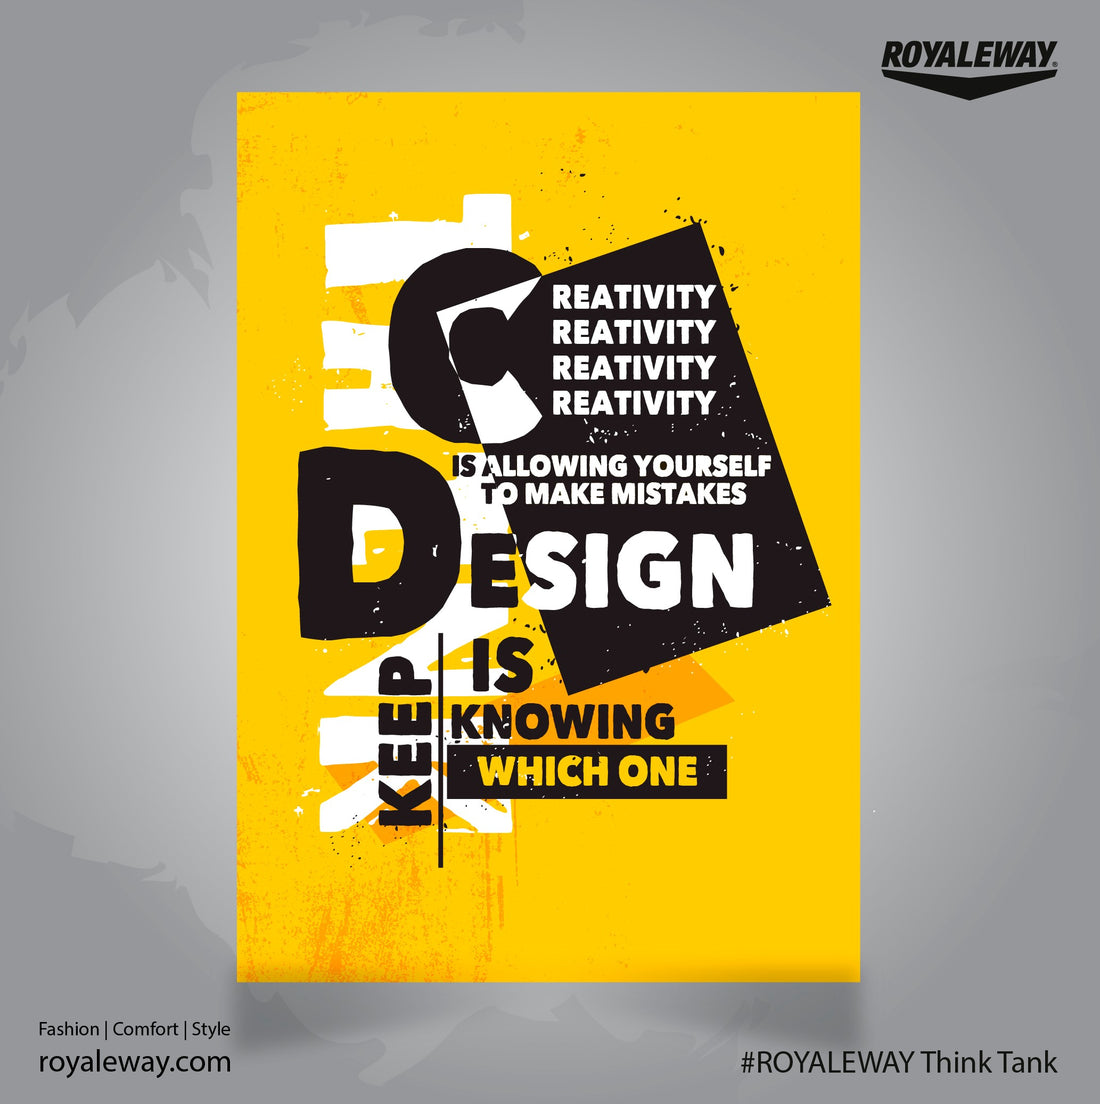 Creativity is allowing yourself to make mistakes, Keep Think Design is knowing which one. ROYALEWAY Think Tank.